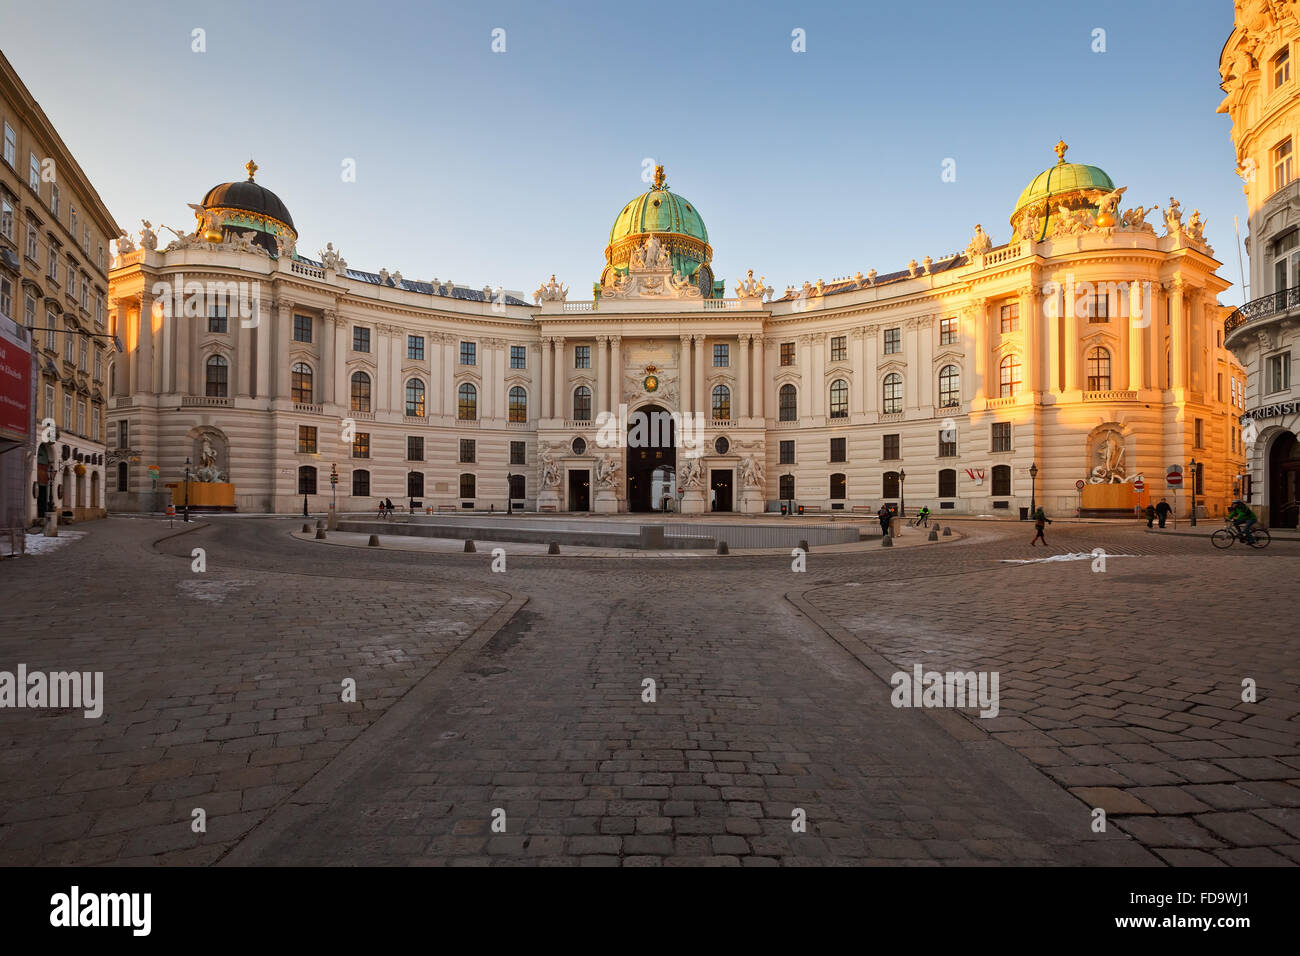 Square in front of the Hofburg palace in Vienna. Stock Photo